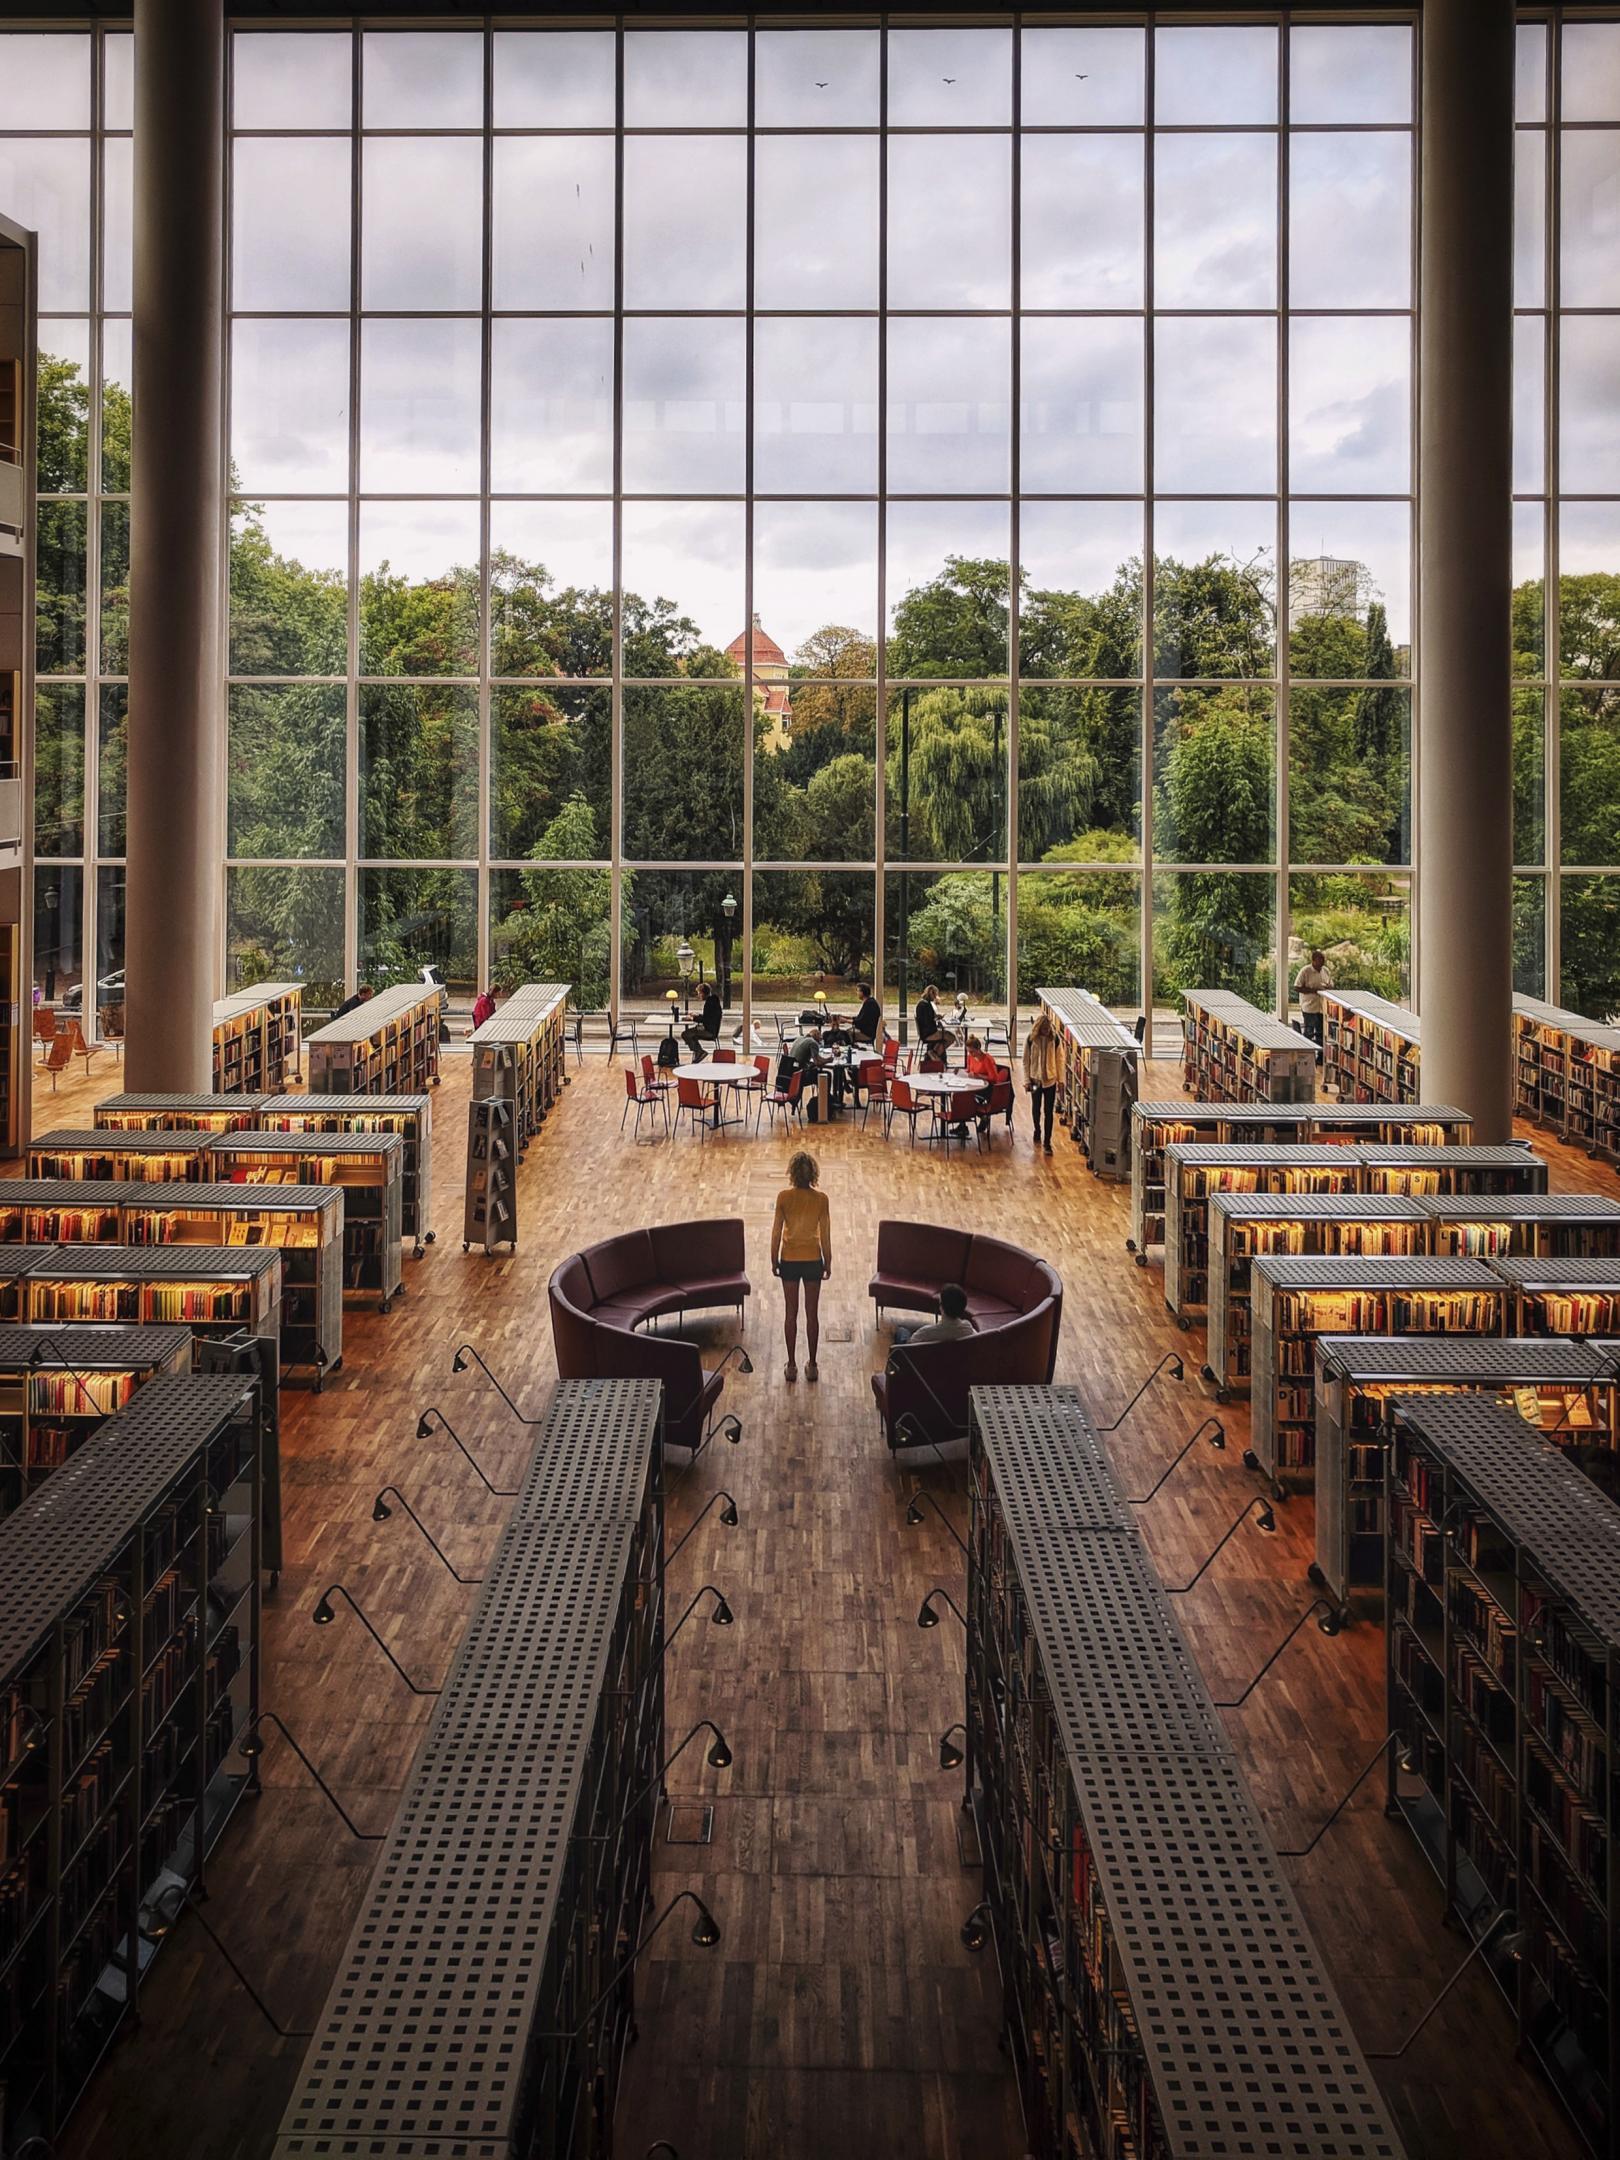 A view of a lush green park from the inside of Malmö City Library